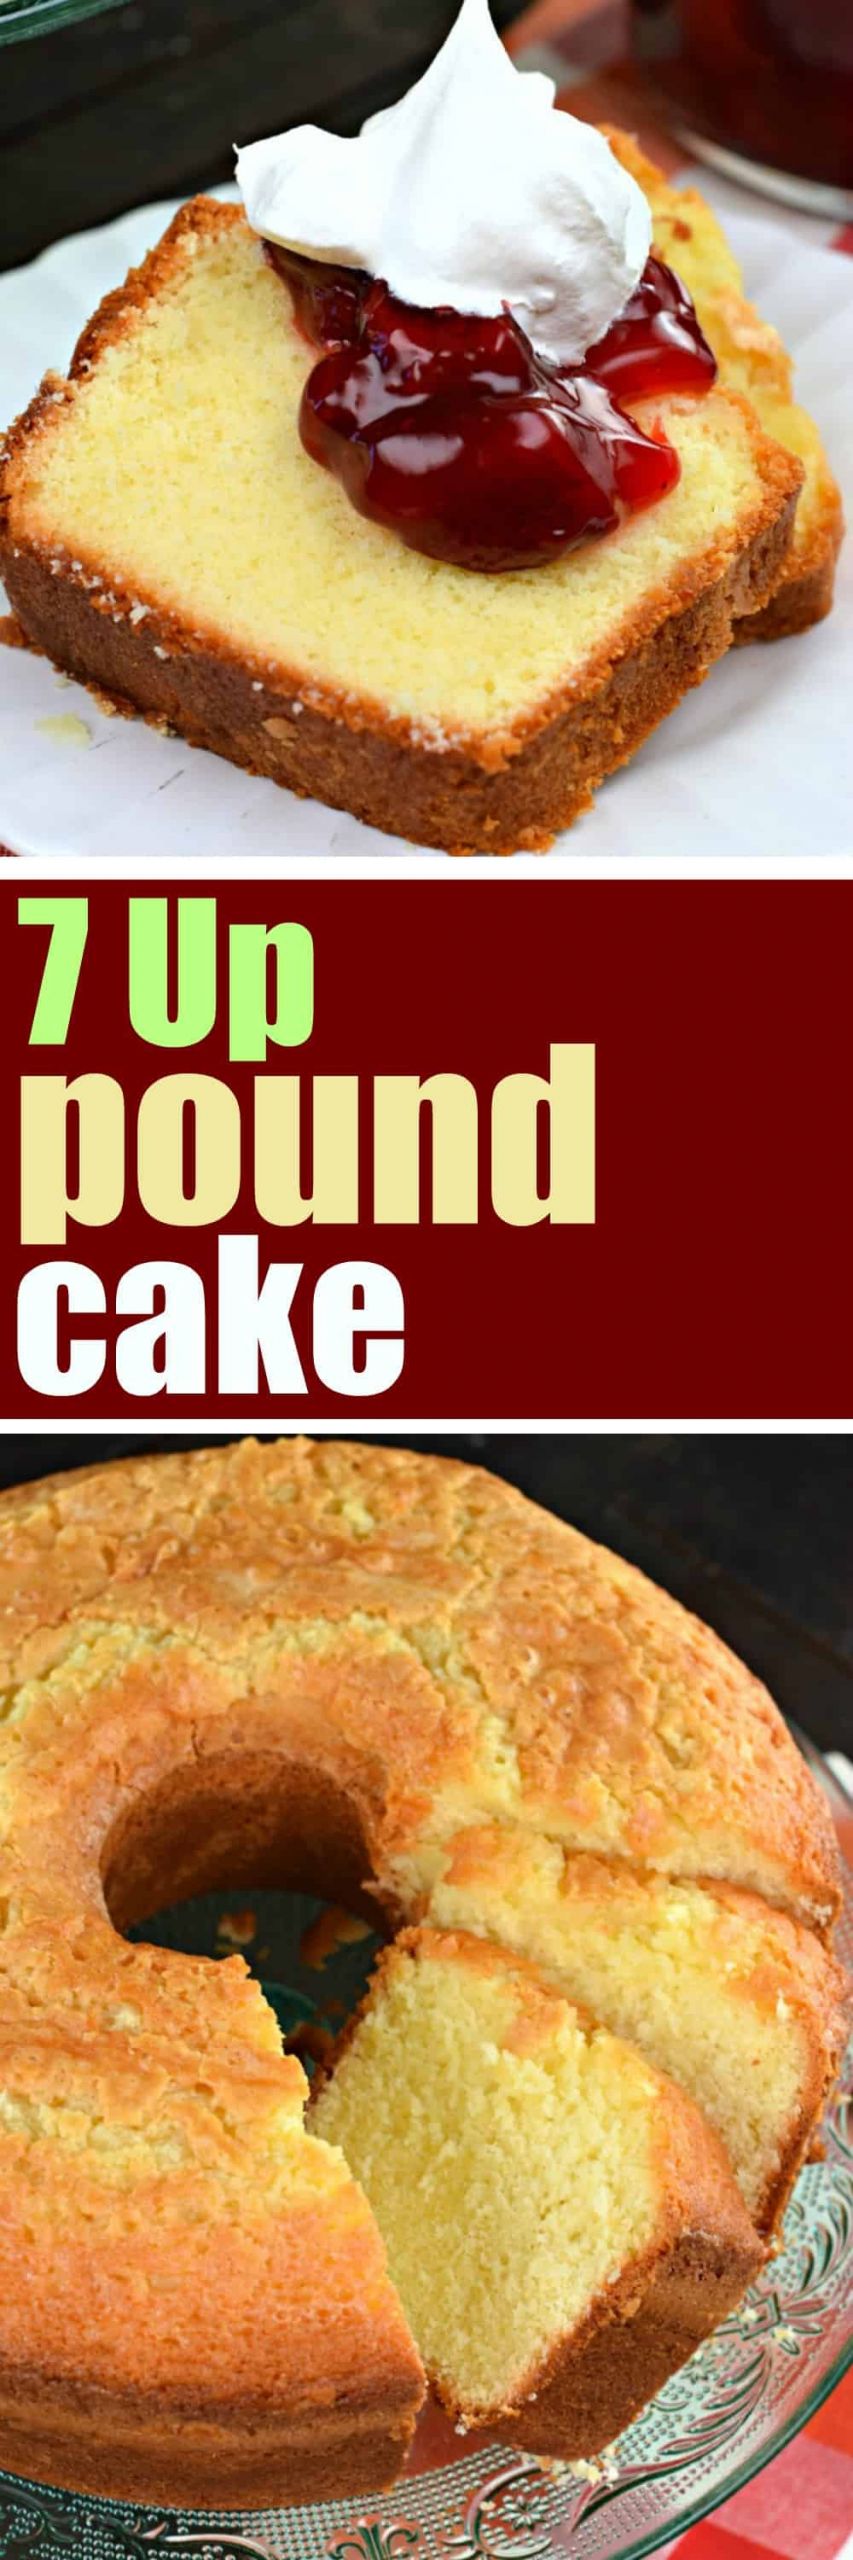 The Best 7up Pound Cake Recipe - Best Recipes Ideas and Collections